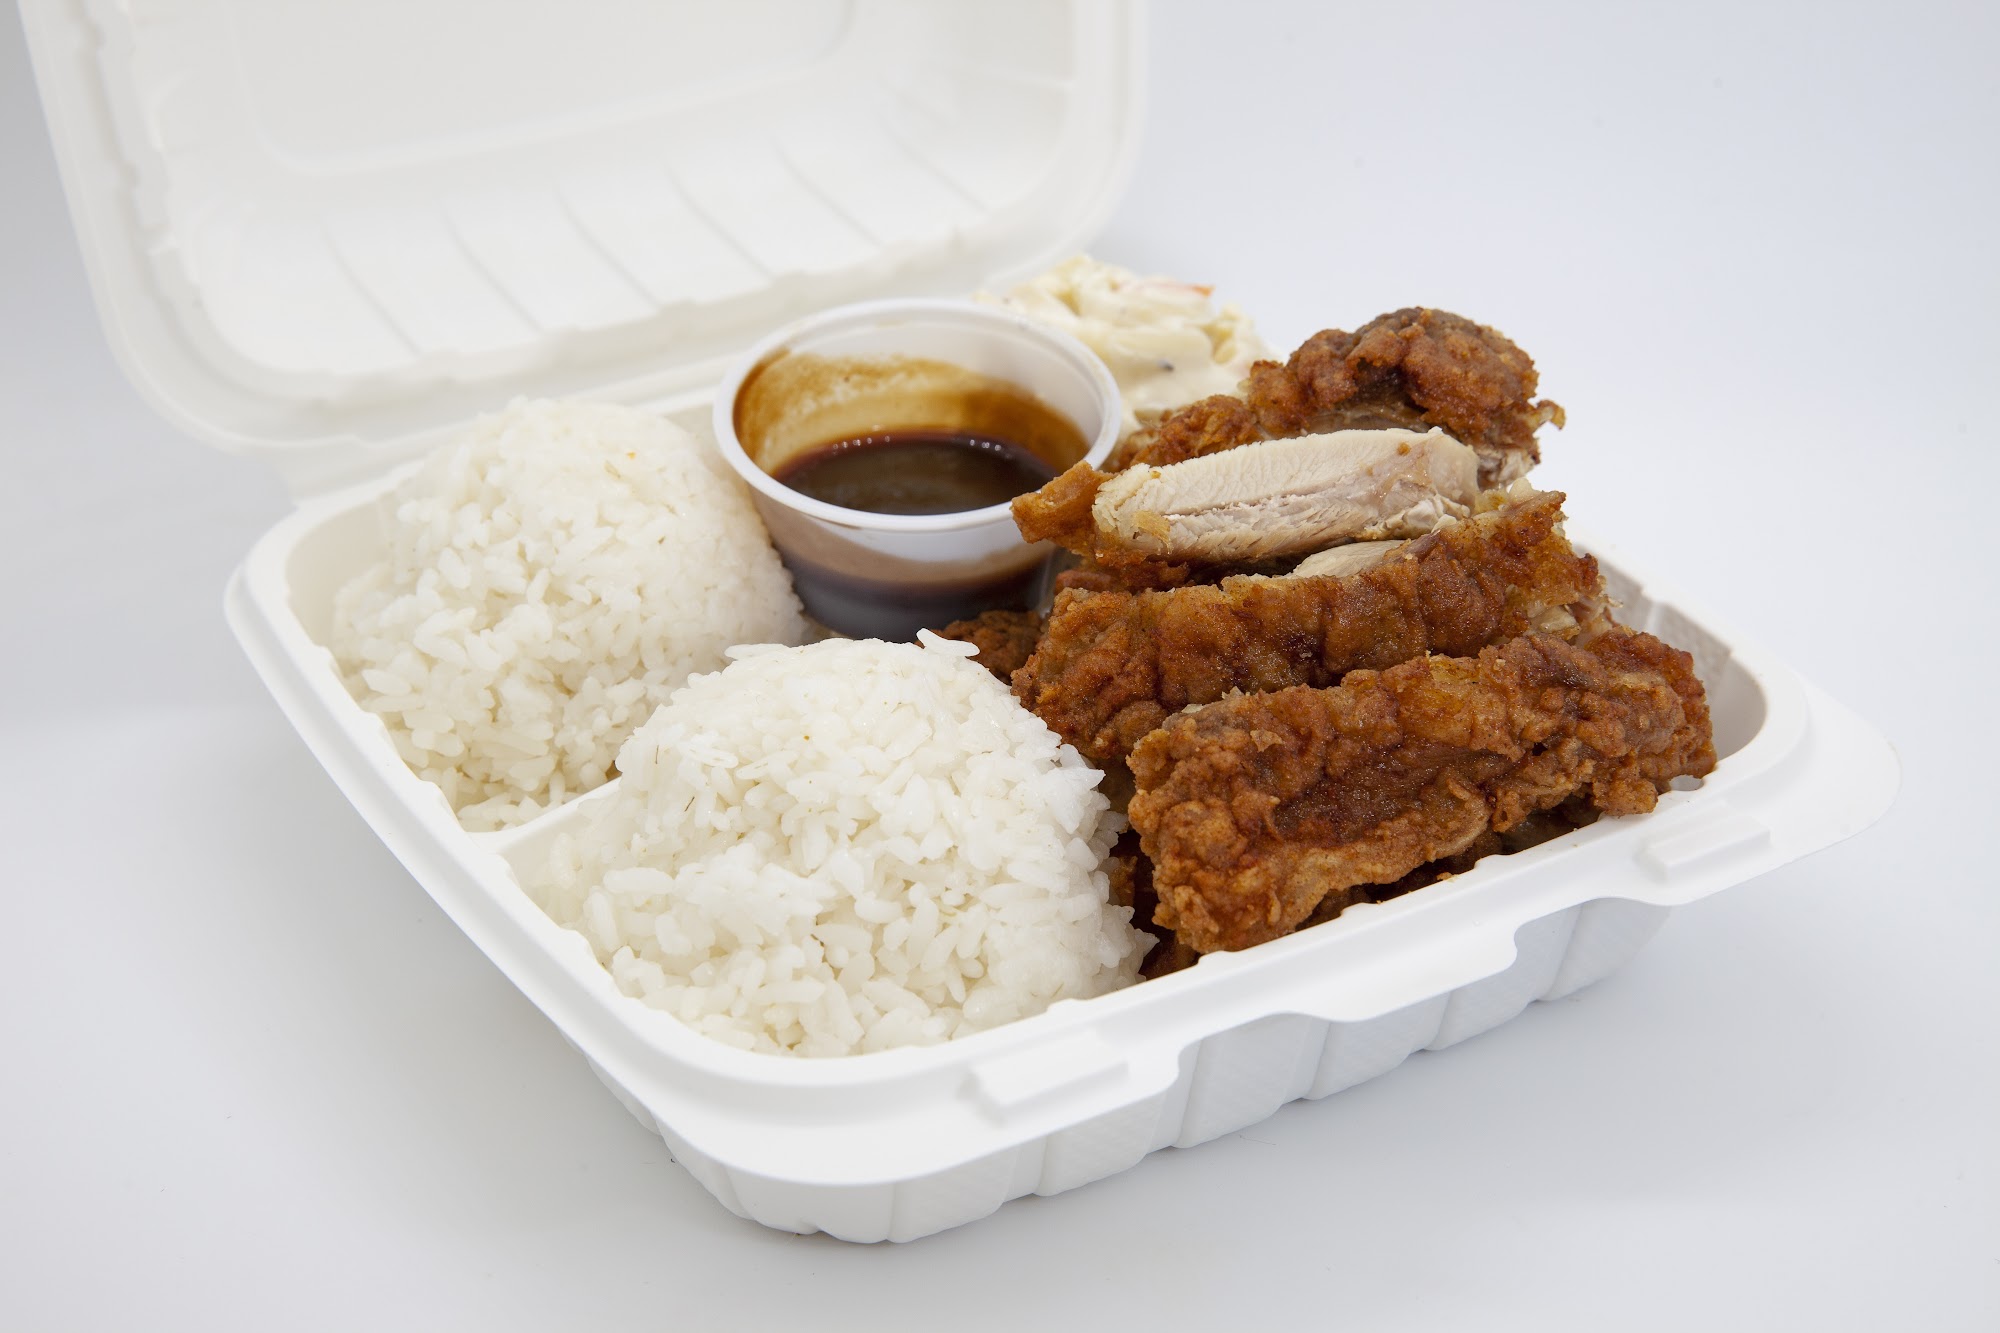 Minit Stop Hawi - Fried Chicken, Convenience Store and Gas Station